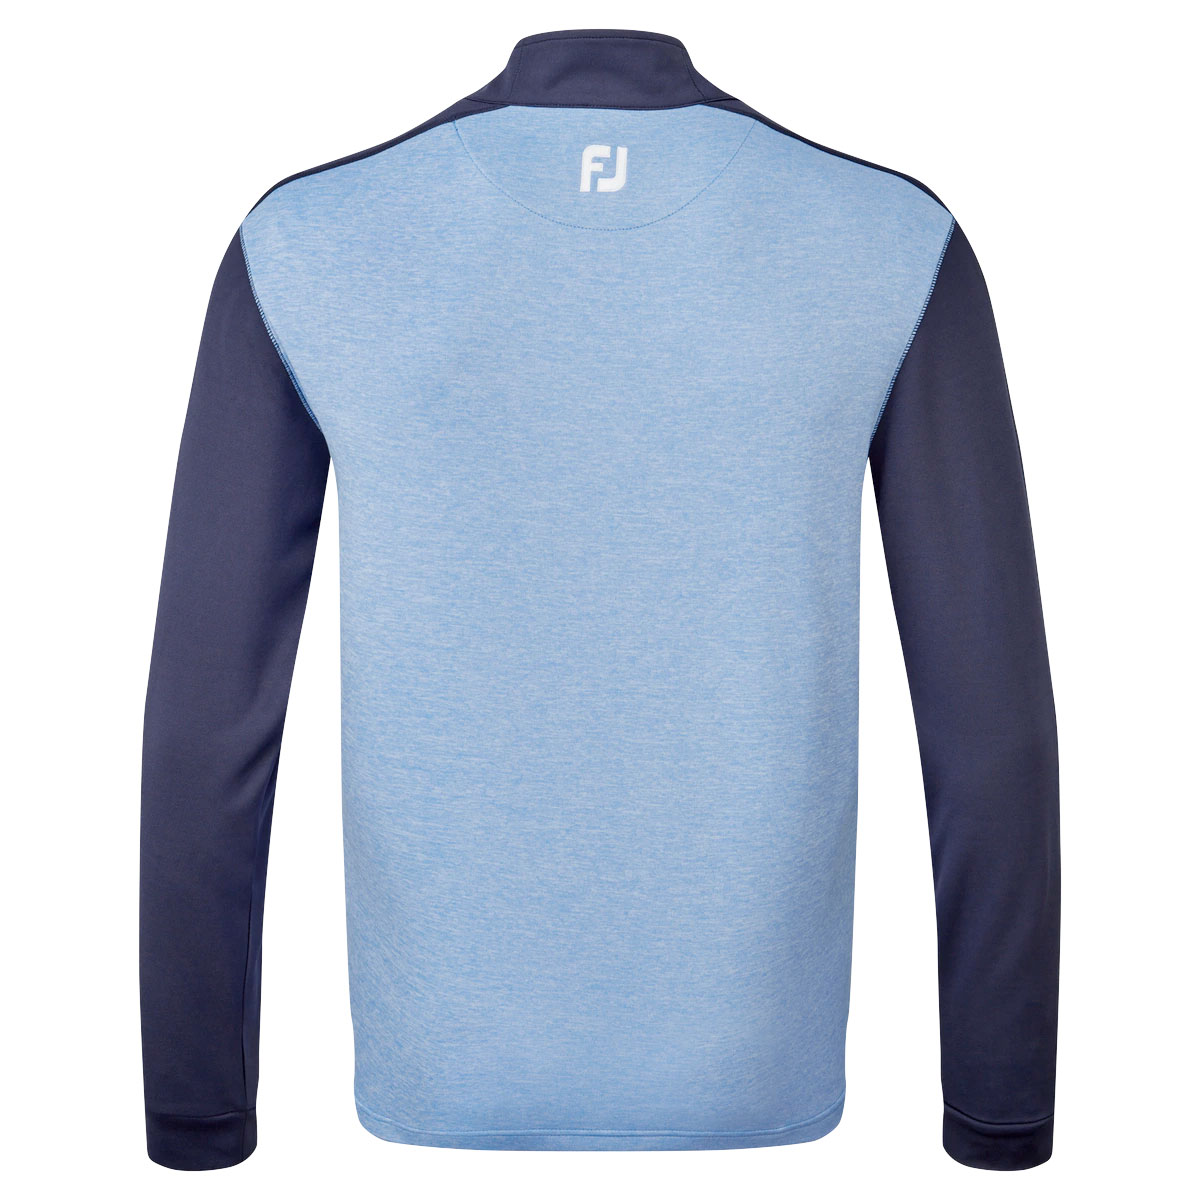 Jersey para hombre Footjoy Lightweight Microstripe Chillout